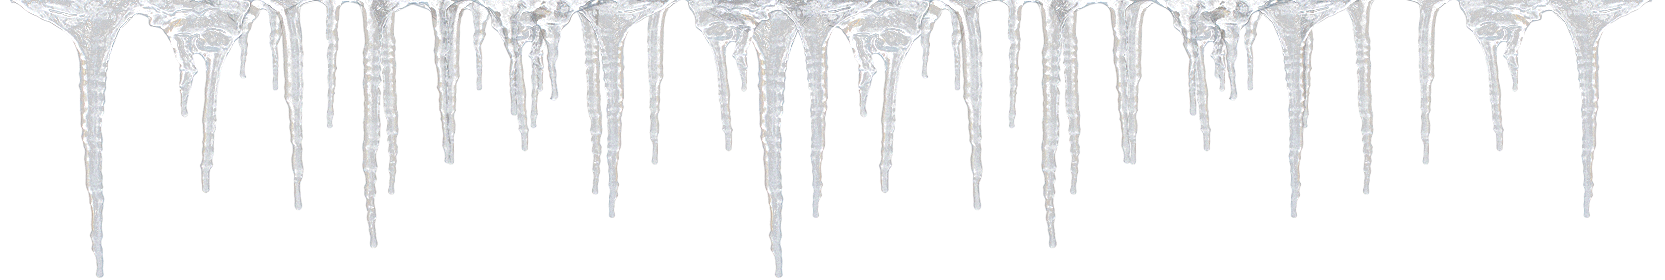 Icicles Png Image - Icicles, Transparent background PNG HD thumbnail